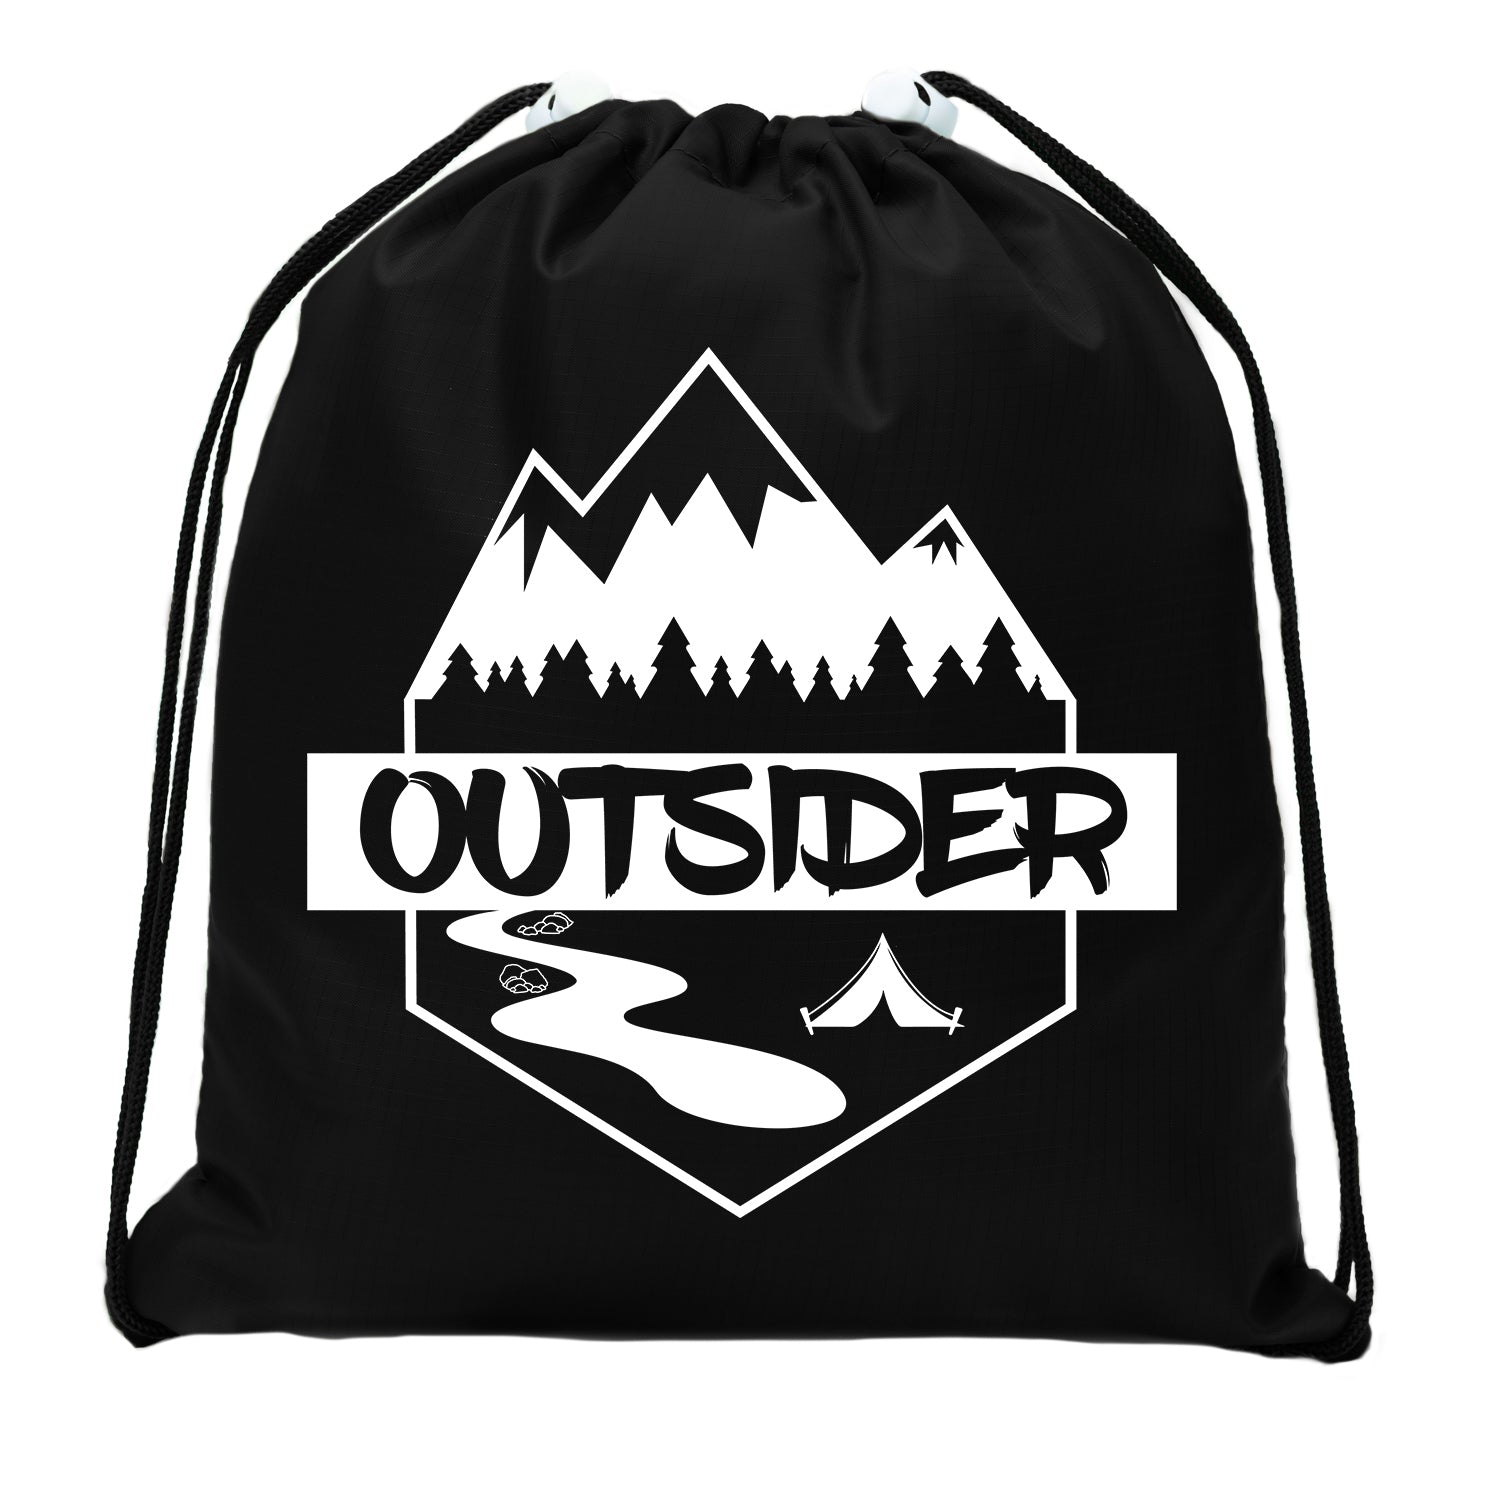 Outsider - Mountains, River and Tent Mini Polyester Drawstring Bag - Mato & Hash